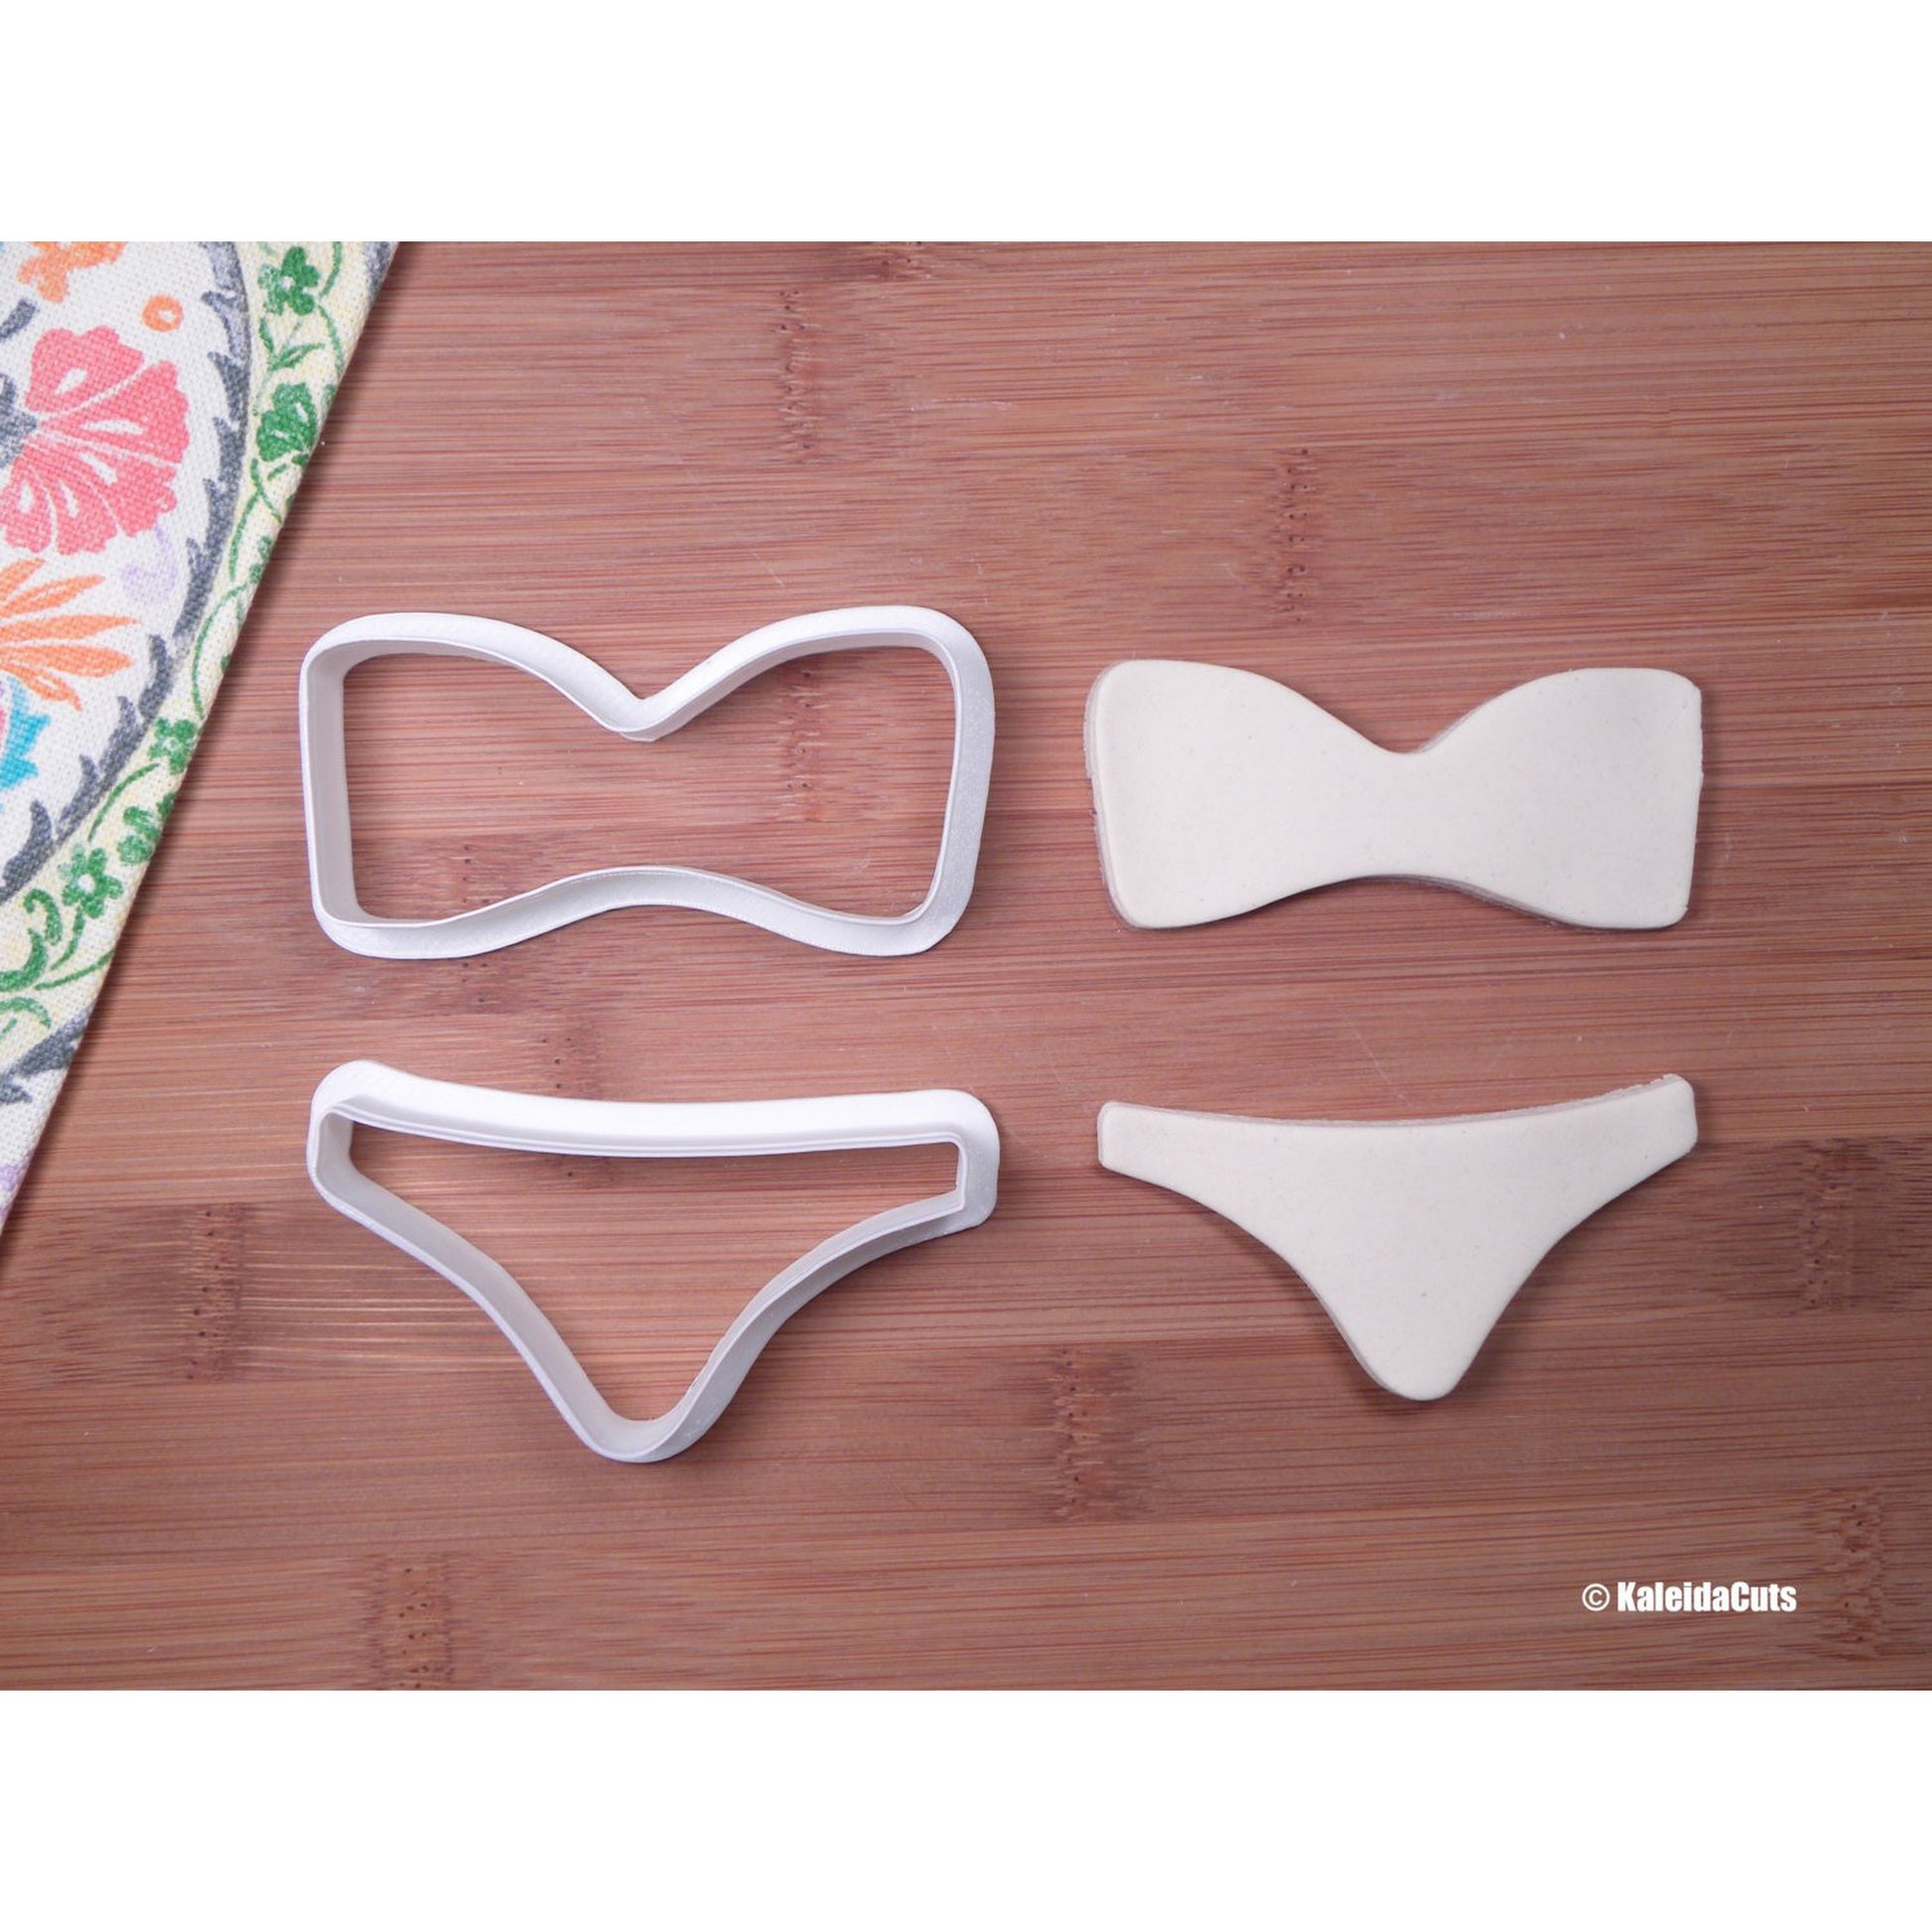 Bathing Suit Cookie Cutter